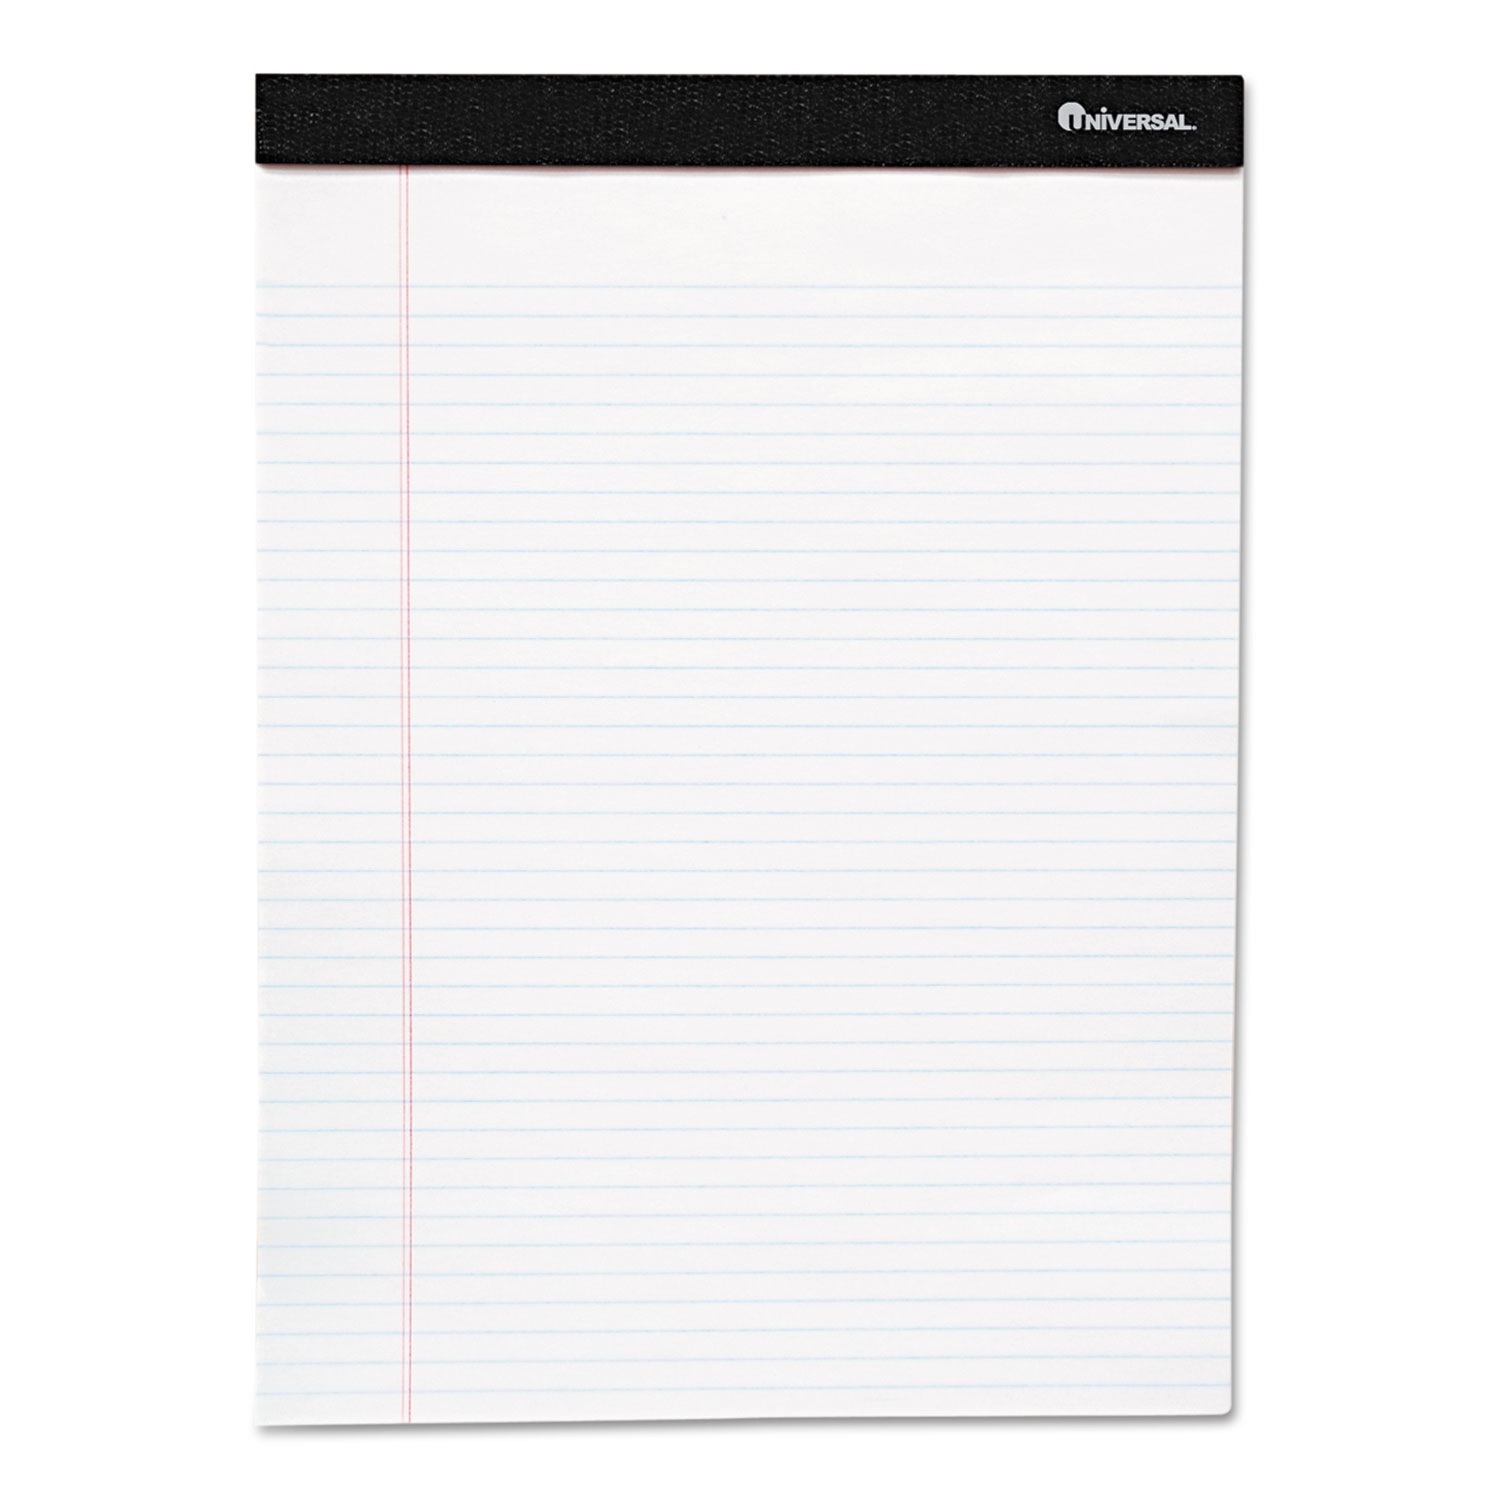  Universal UNV57300 Premium Ruled Writing Pads, Narrow Rule, 5 x 8, White, 50 Sheets, 12/Pack (UNV57300) 